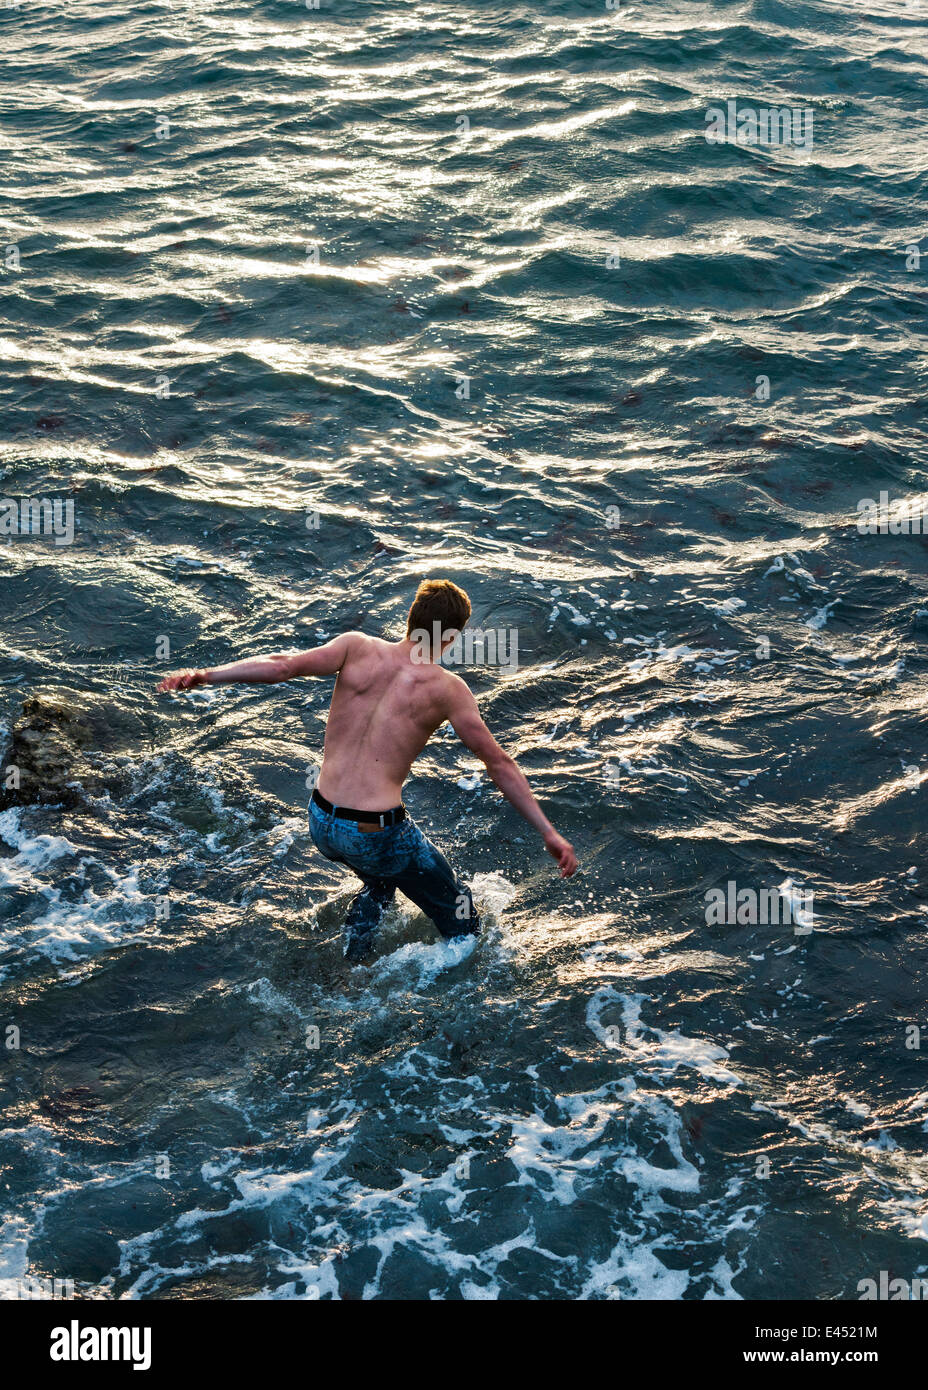 Man swimming in rough waters. Stock Photo